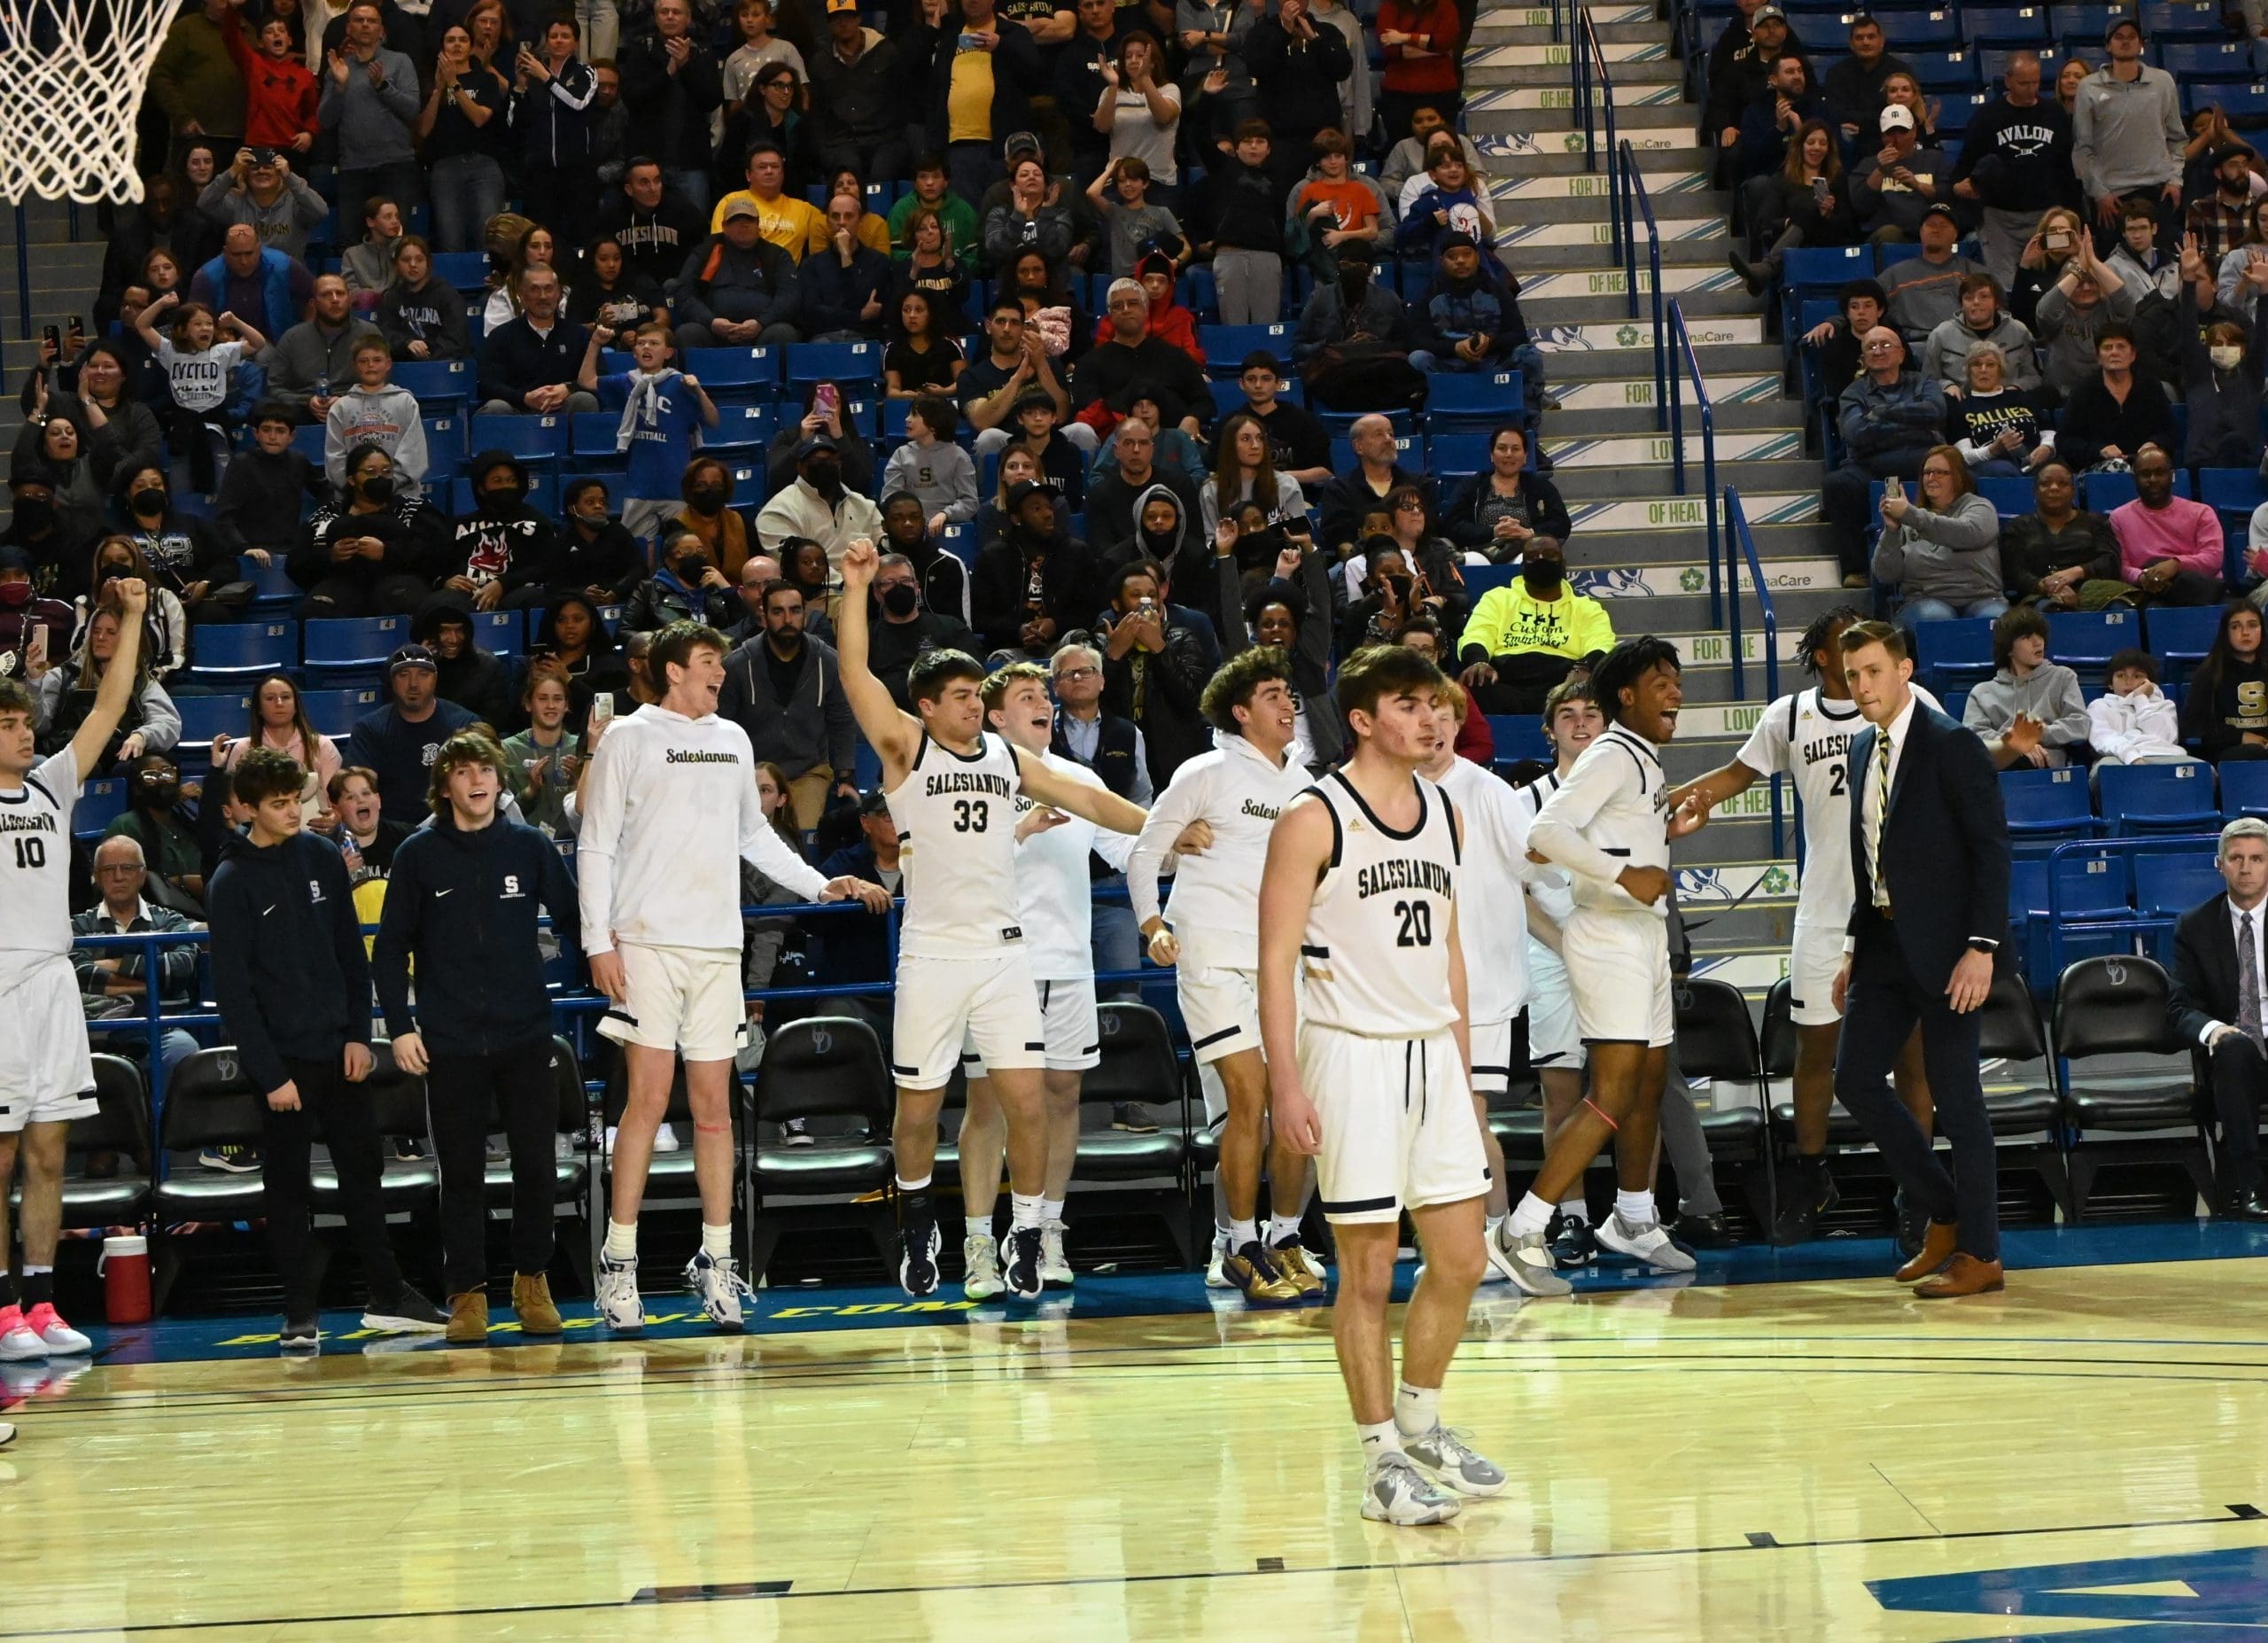 Featured image for “Sallies Advances to State Final with Win over Howard”